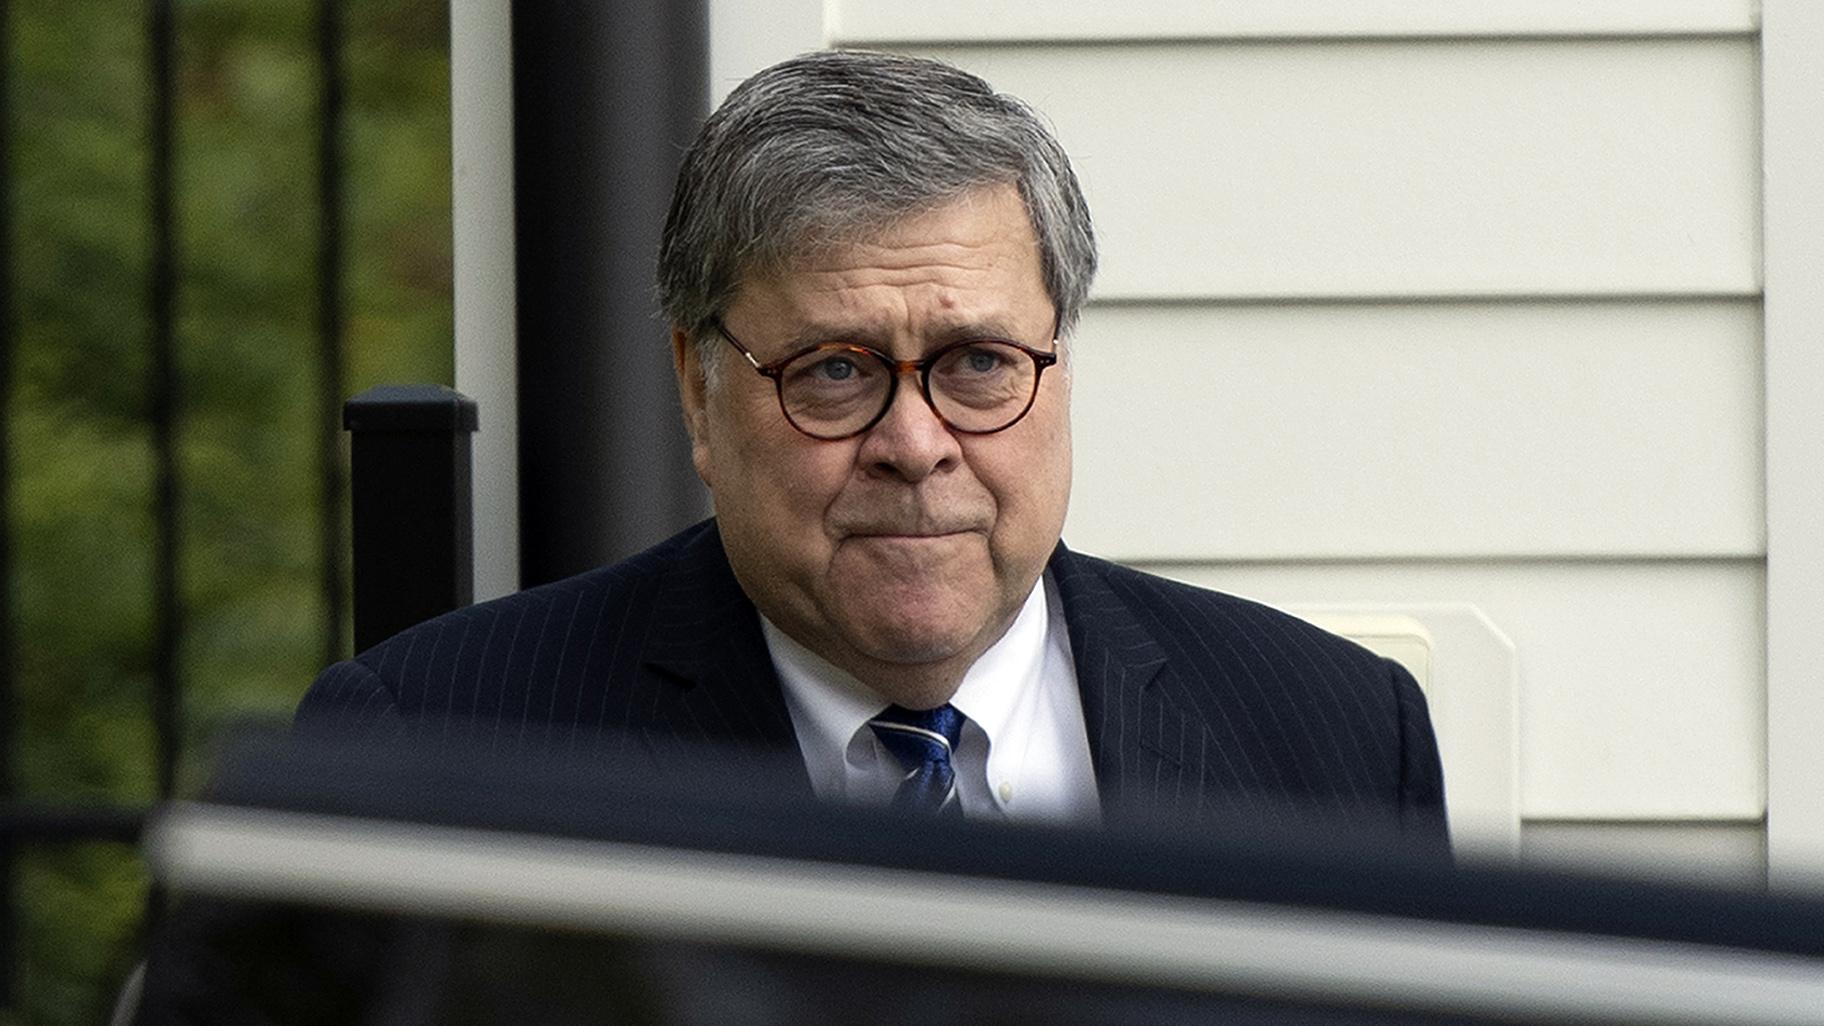 Attorney General William Barr leaves his home in McLean, Virginia, on Wednesday morning, April 17, 2019. (AP Photo / Sait Serkan Gurbuz)